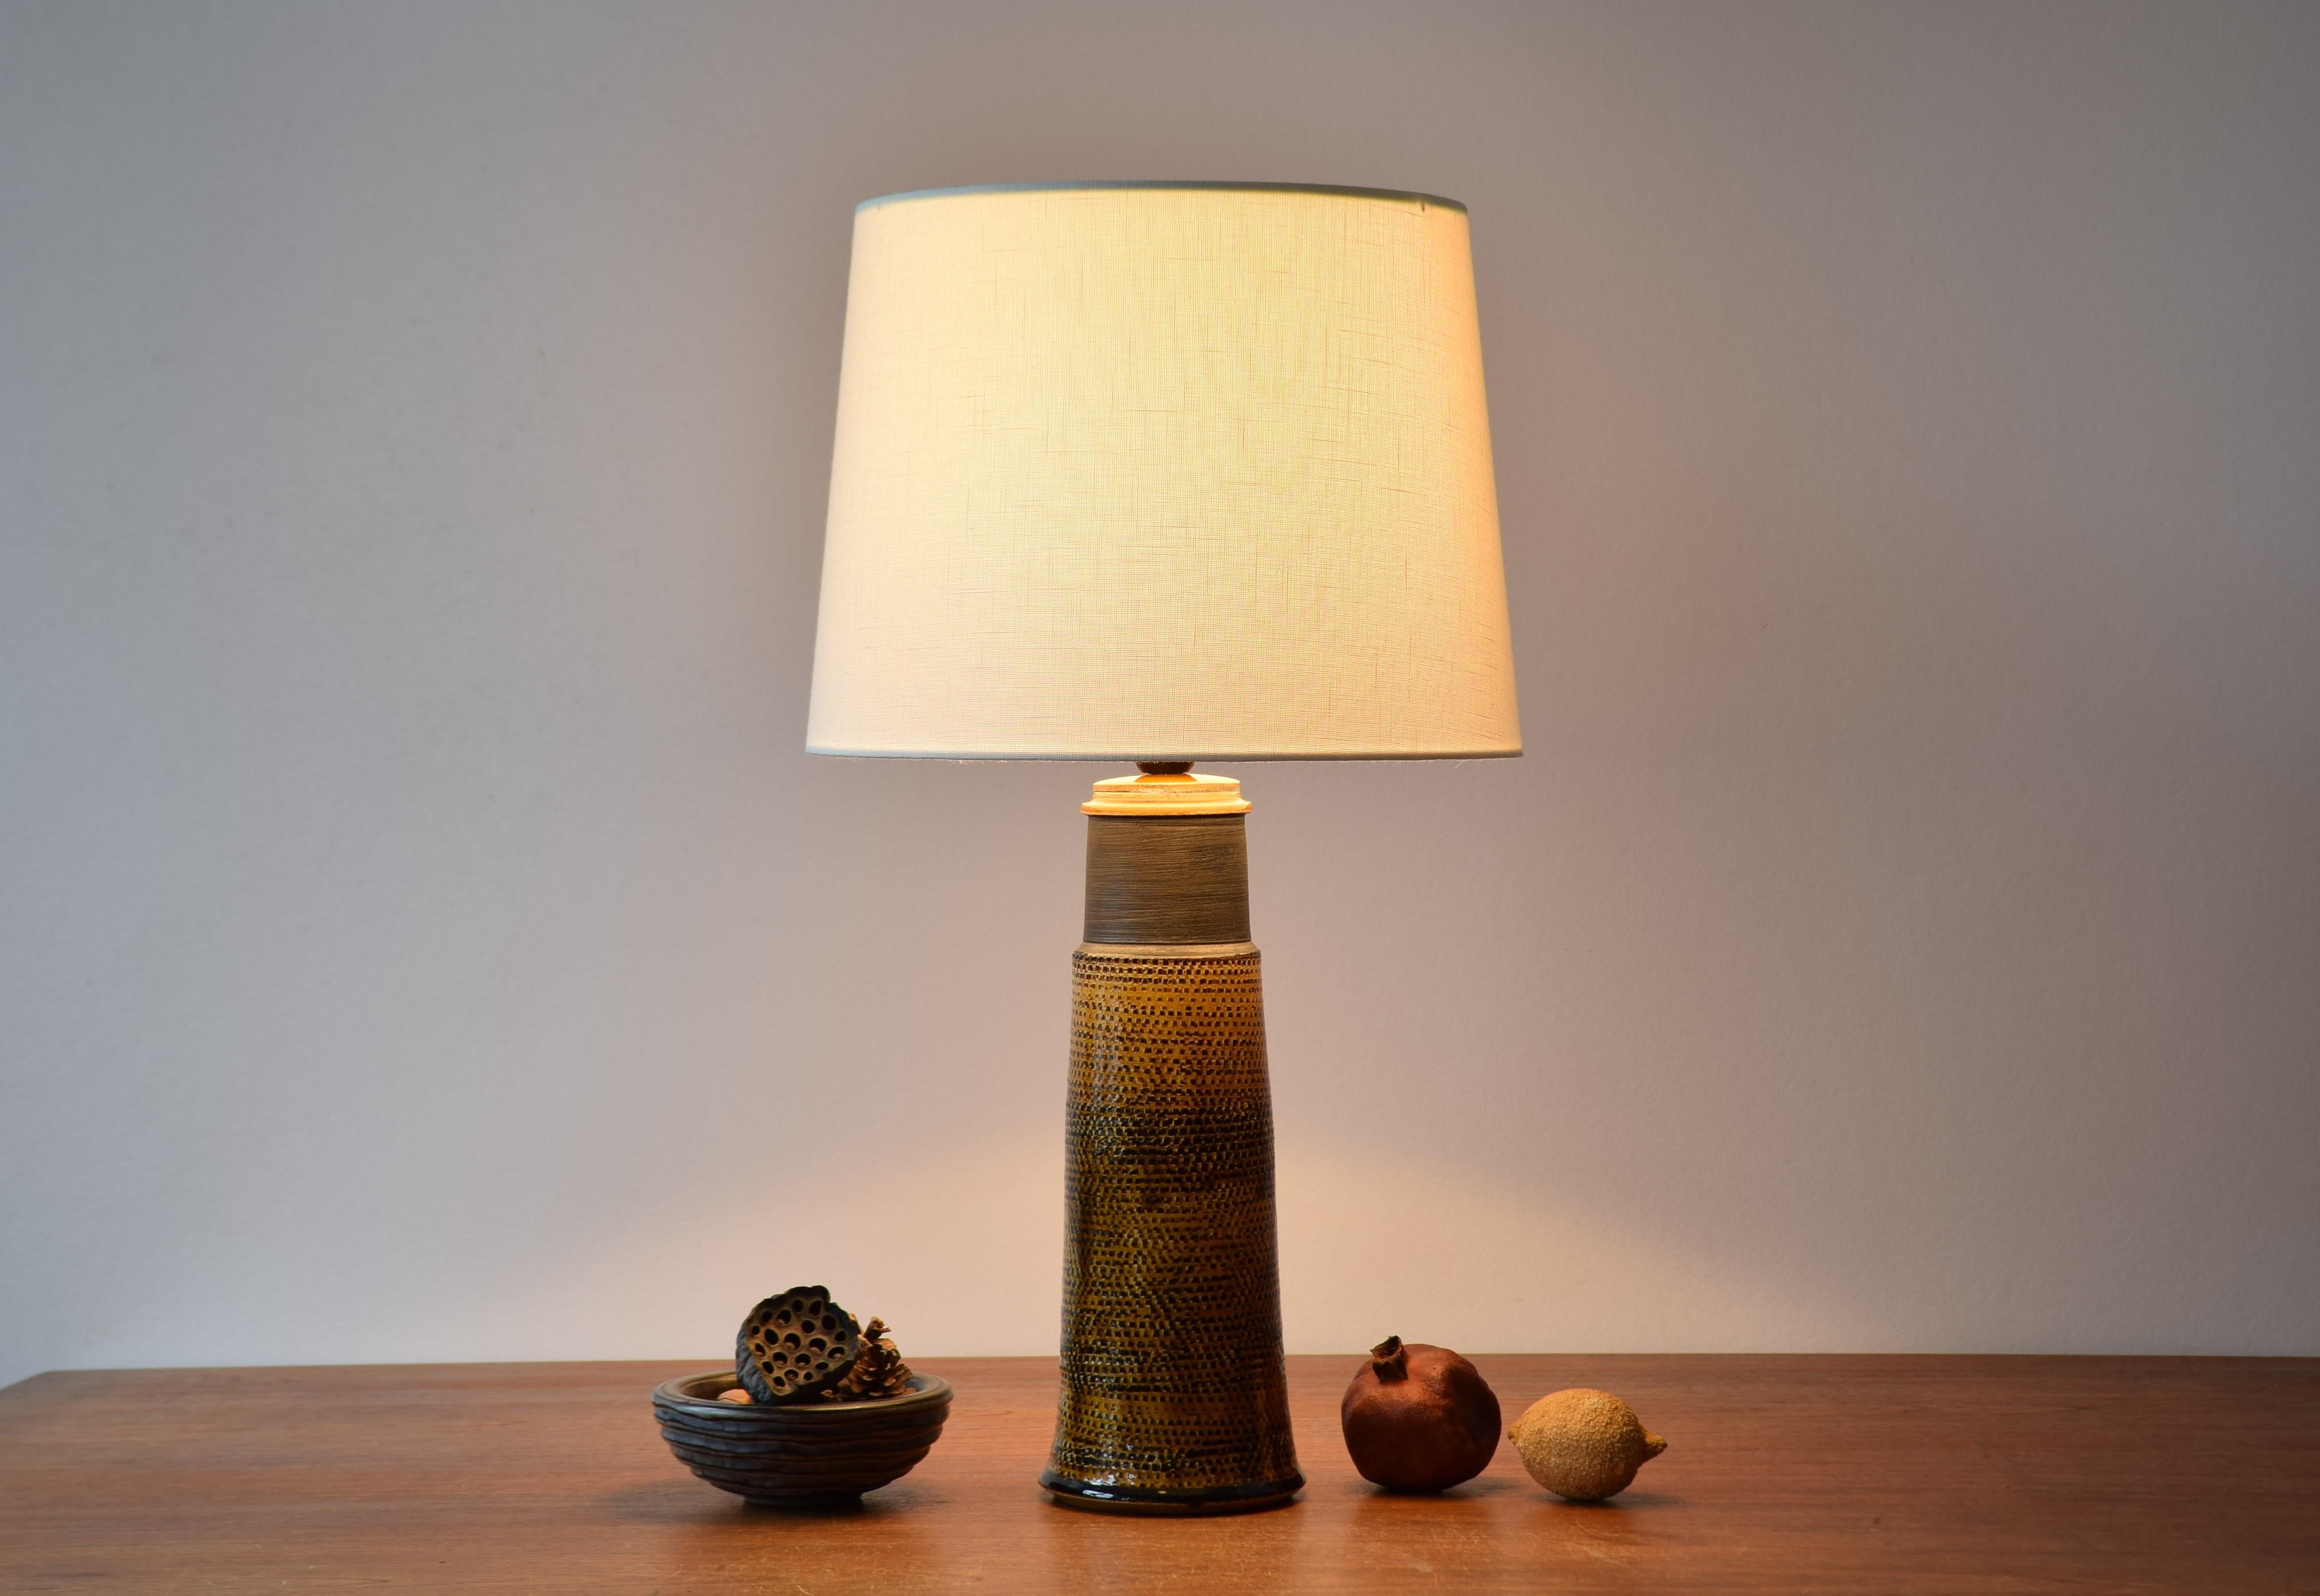 Tall table lamp from Herman A. Kähler´s (HAK) ceramic workshop in Denmark, made ca 1960´s. The design is most likely by Nils Kähler.

Nils Kähler (1906-1979) was fourth generation of the family Kähler. He and his brother Herman Jørgen Kähler, who